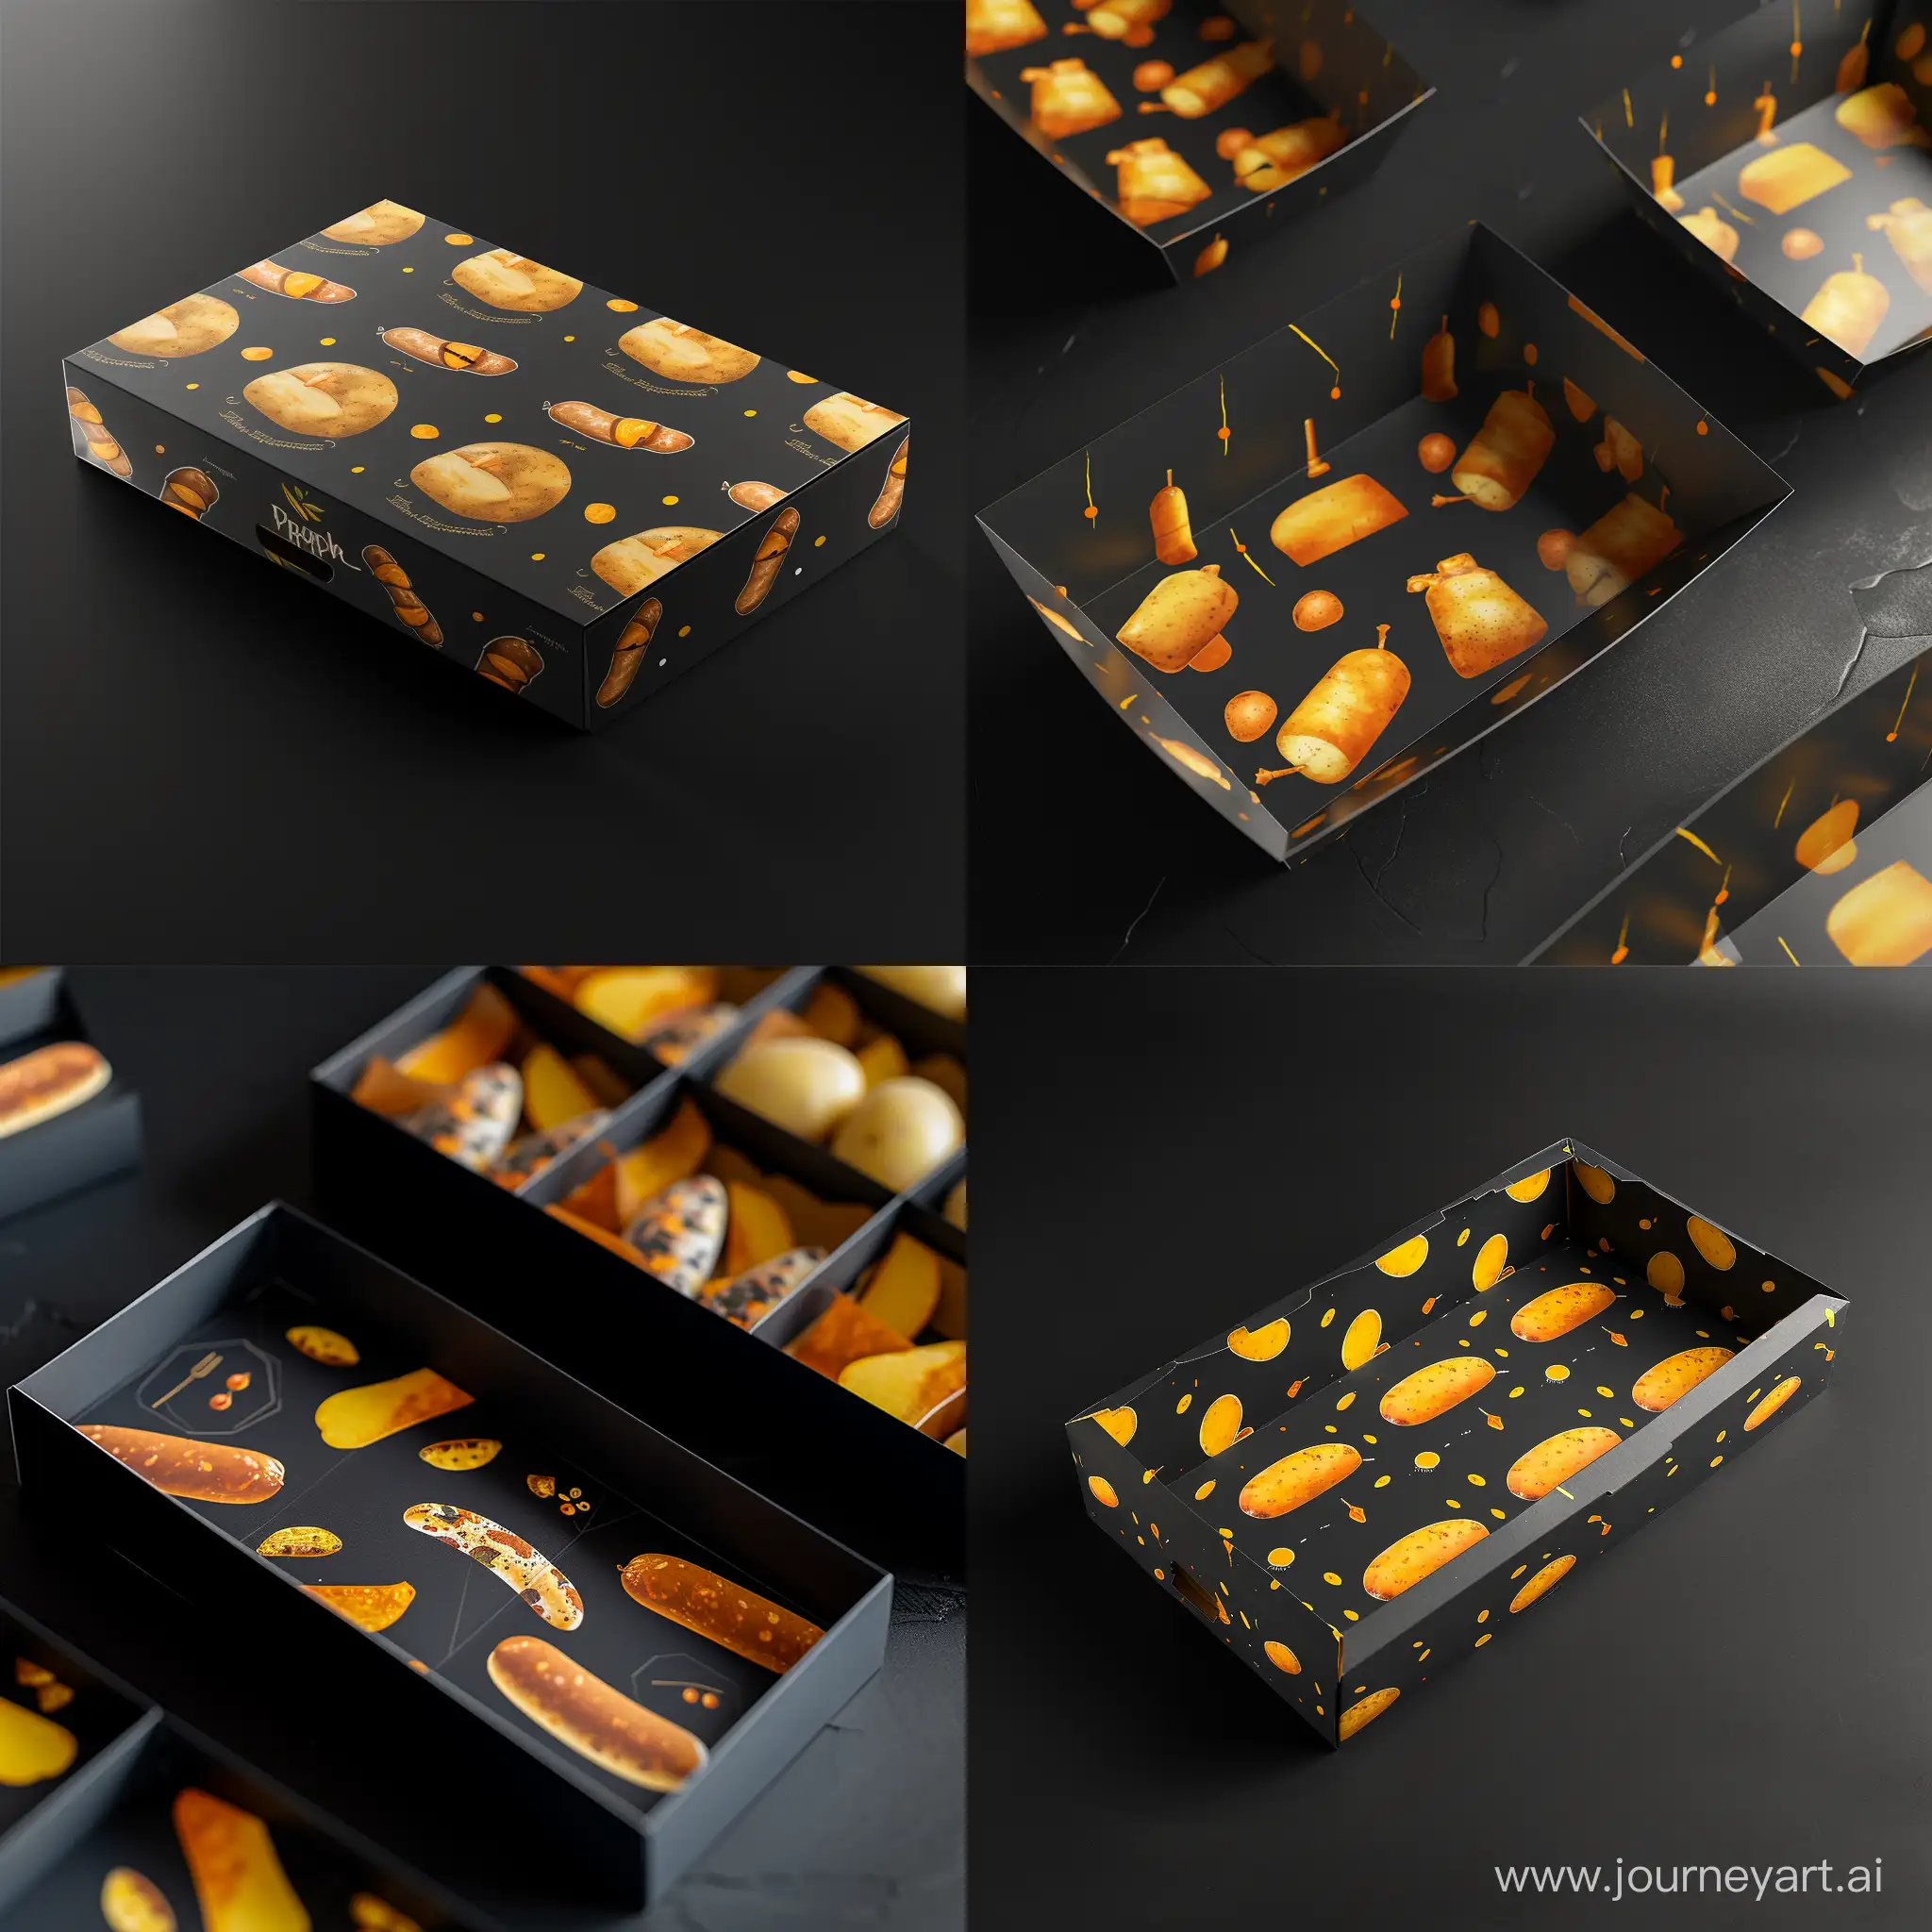 An empty Potato food box with a design on it with a beautiful matte black background. Small pictures of sausages and potatoes are designed on it in yellow and orange colors.